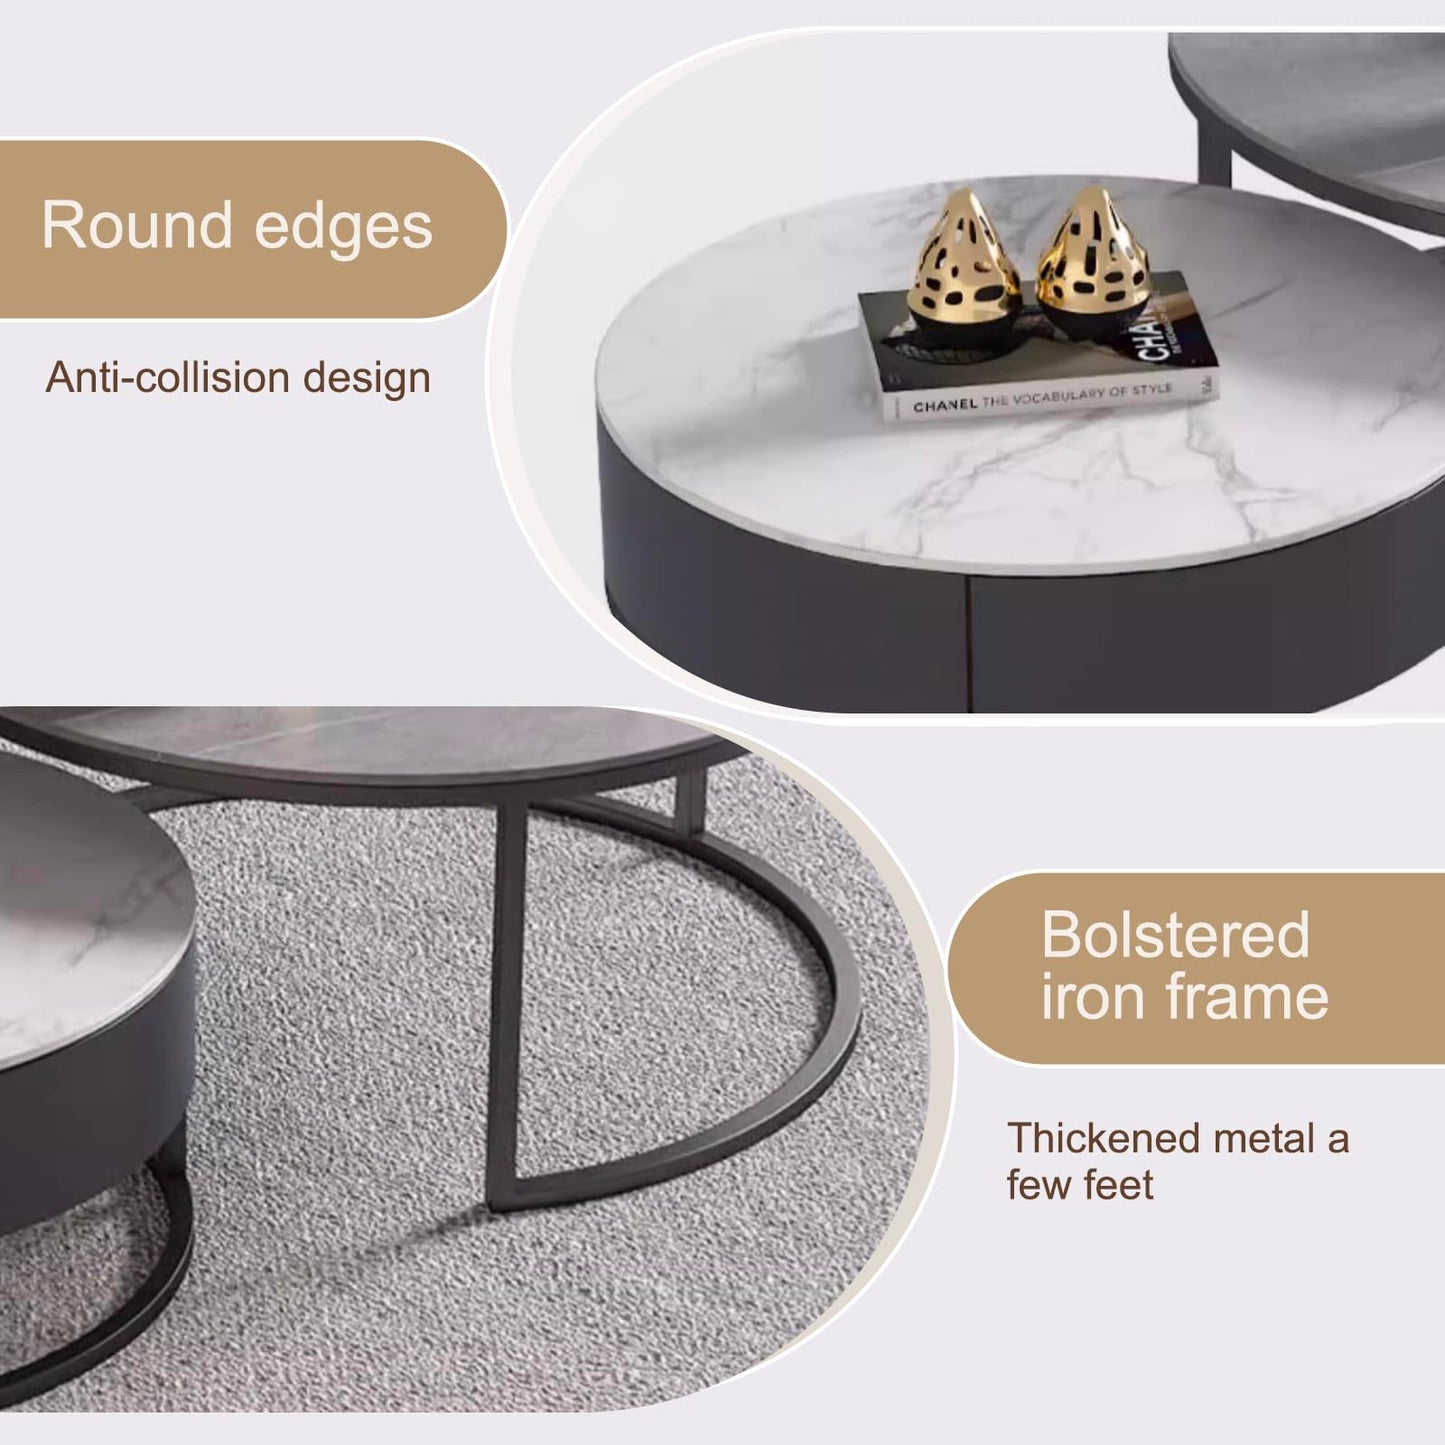 28IN Nesting Coffee Table Set of 3 - Round Coffee Tables with Black Frame Legs & Round Corner Design | Glossy Tabletop & Large Drawer Storage